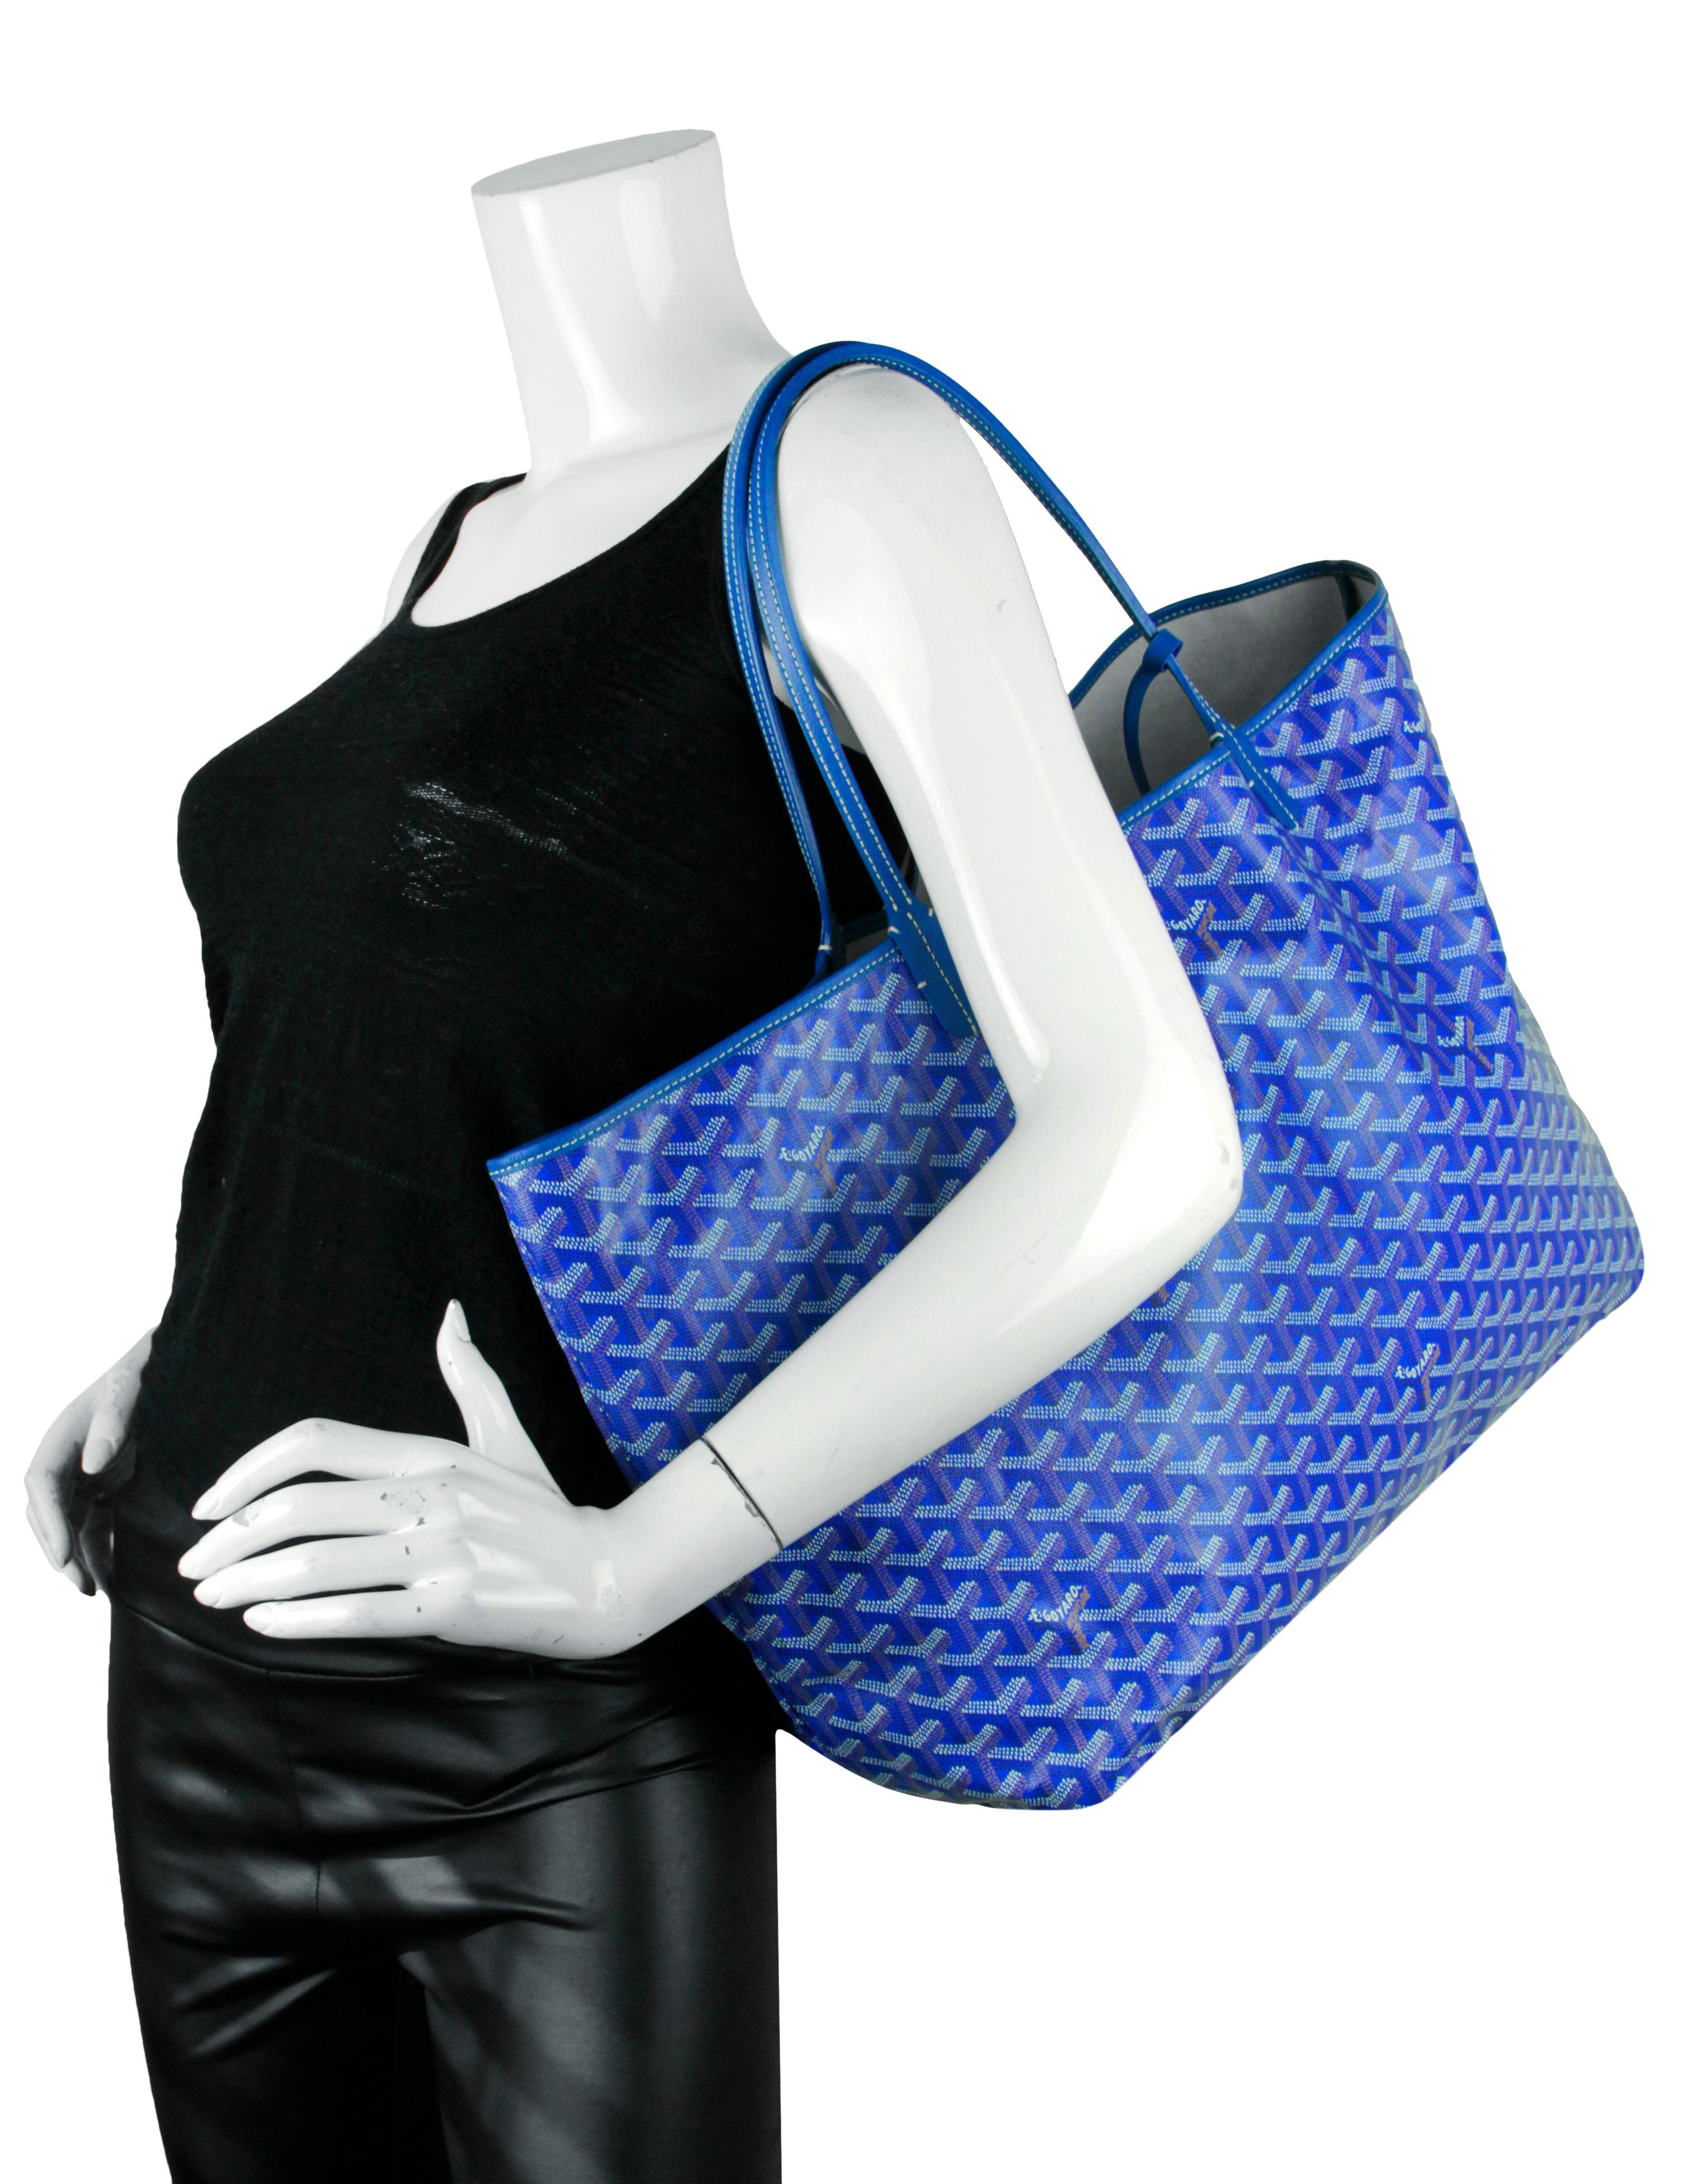 Goyard Blue Canvas Goyardine Saint Louis GM Tote Bag w/ Insert

Made In: France
Color: Blue
Hardware: Silvertone
Materials: Canvas
Lining: Canvas
Closure/Opening: Open top
Exterior Pockets: None
Interior Pockets: Insert with snap closure
Exterior